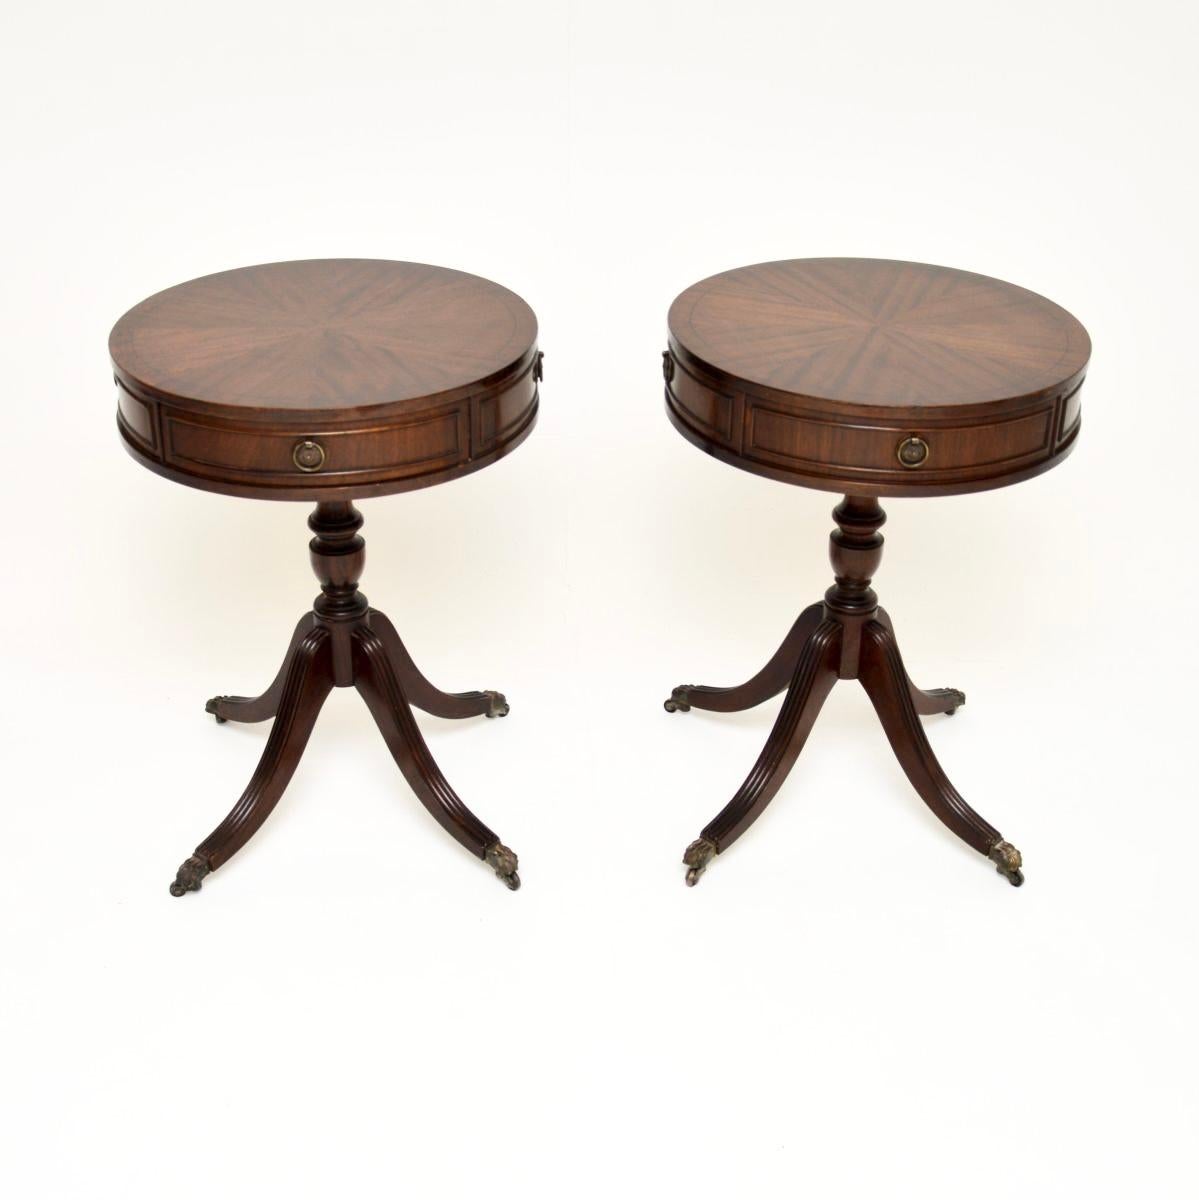 A smart and very useful pair of antique Regency style side tables. They were made in England, they date from around the 1950’s.

The drum shaped circular tops have a drawer on each side and lovely grain patterns. They stand on splayed bases with